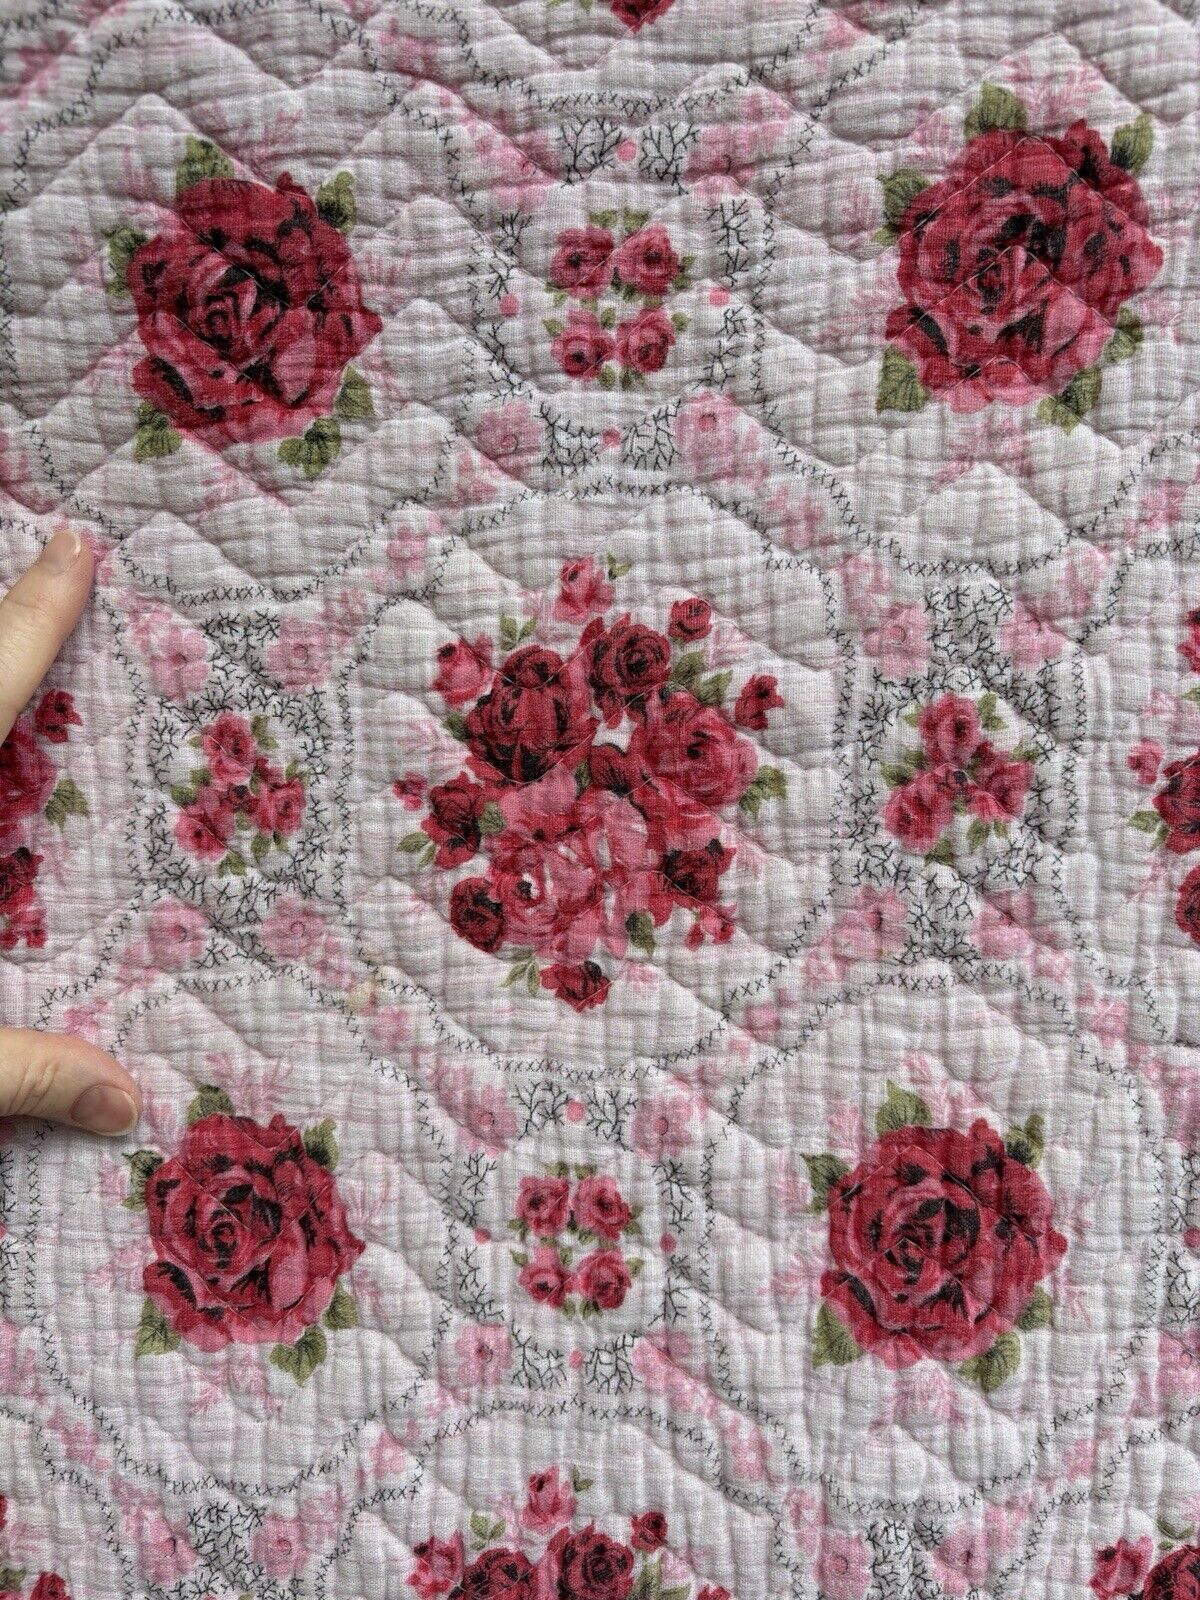 VTG Quilted Coverlet Cabbage Roses Blanket 1950s 60s Pink Red 66x66\